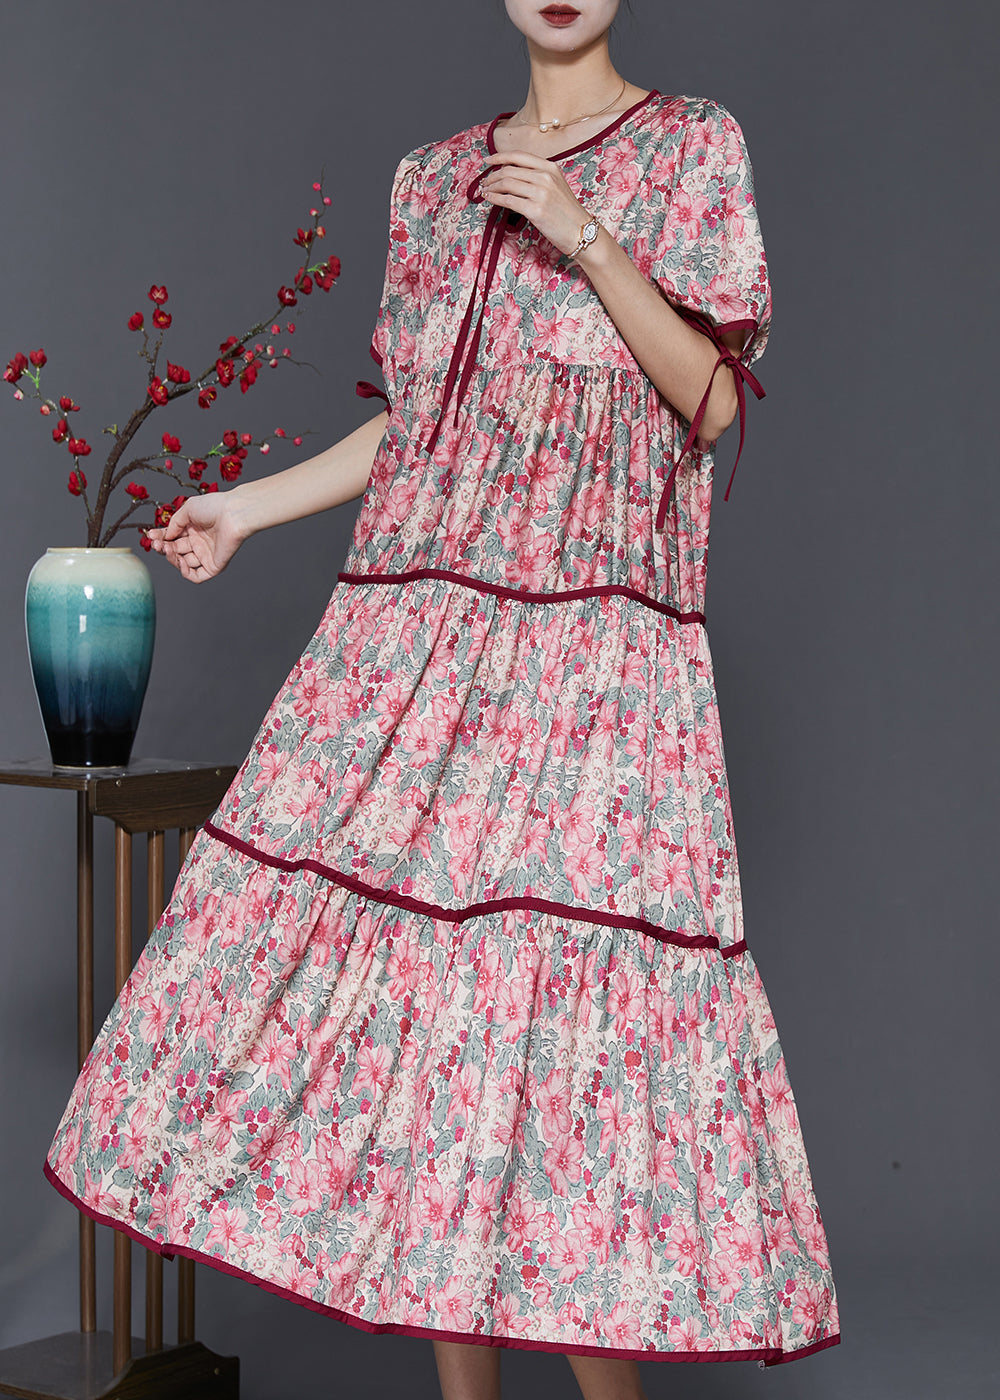 Red Print Cotton Long Dresses Lace Up Spring